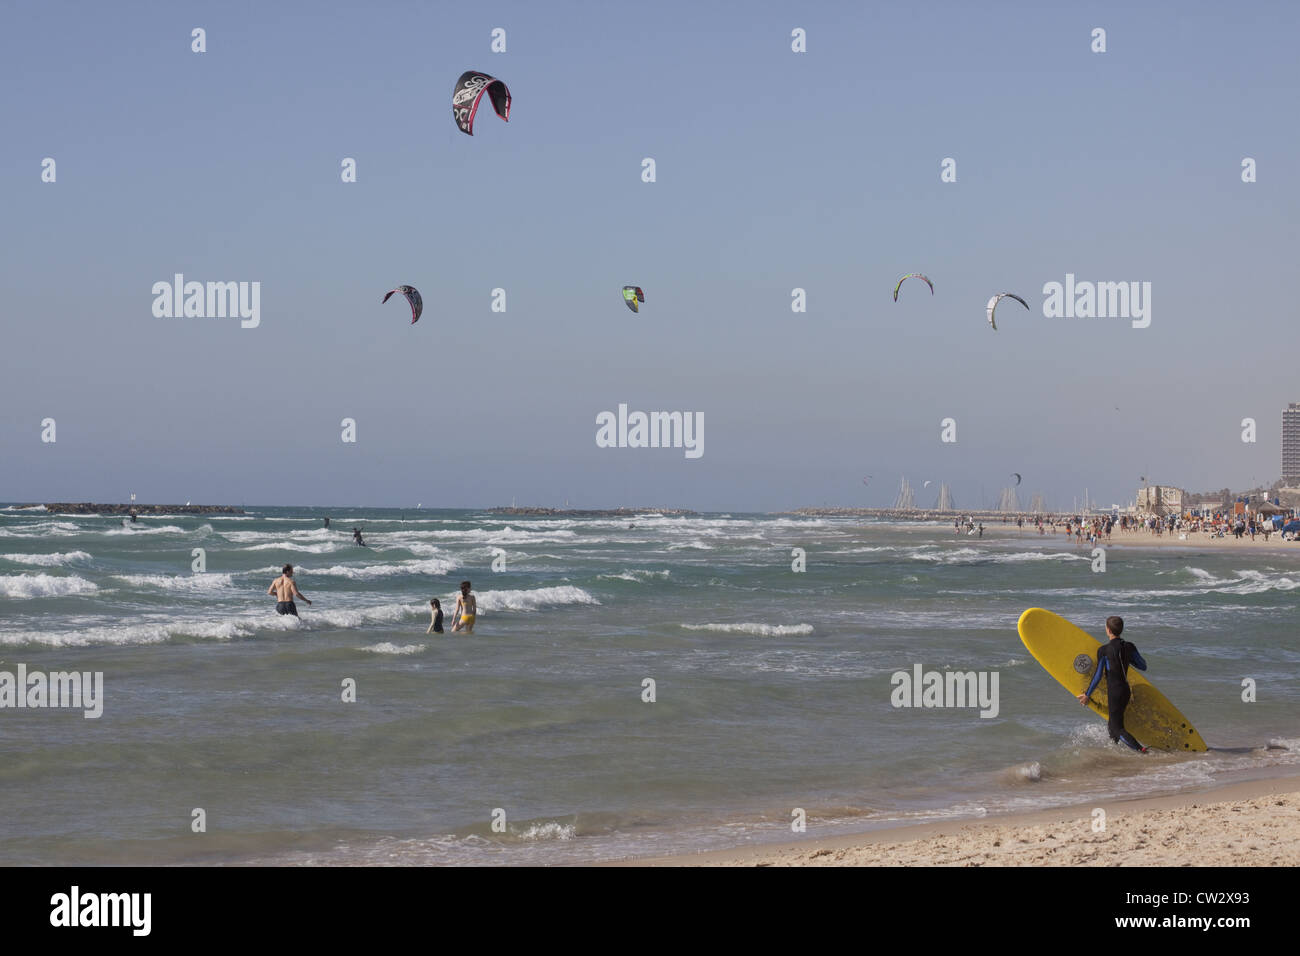 Surfer entering the water with kite-surfers and swimmers in the background, Tel Aviv, Israel Stock Photo